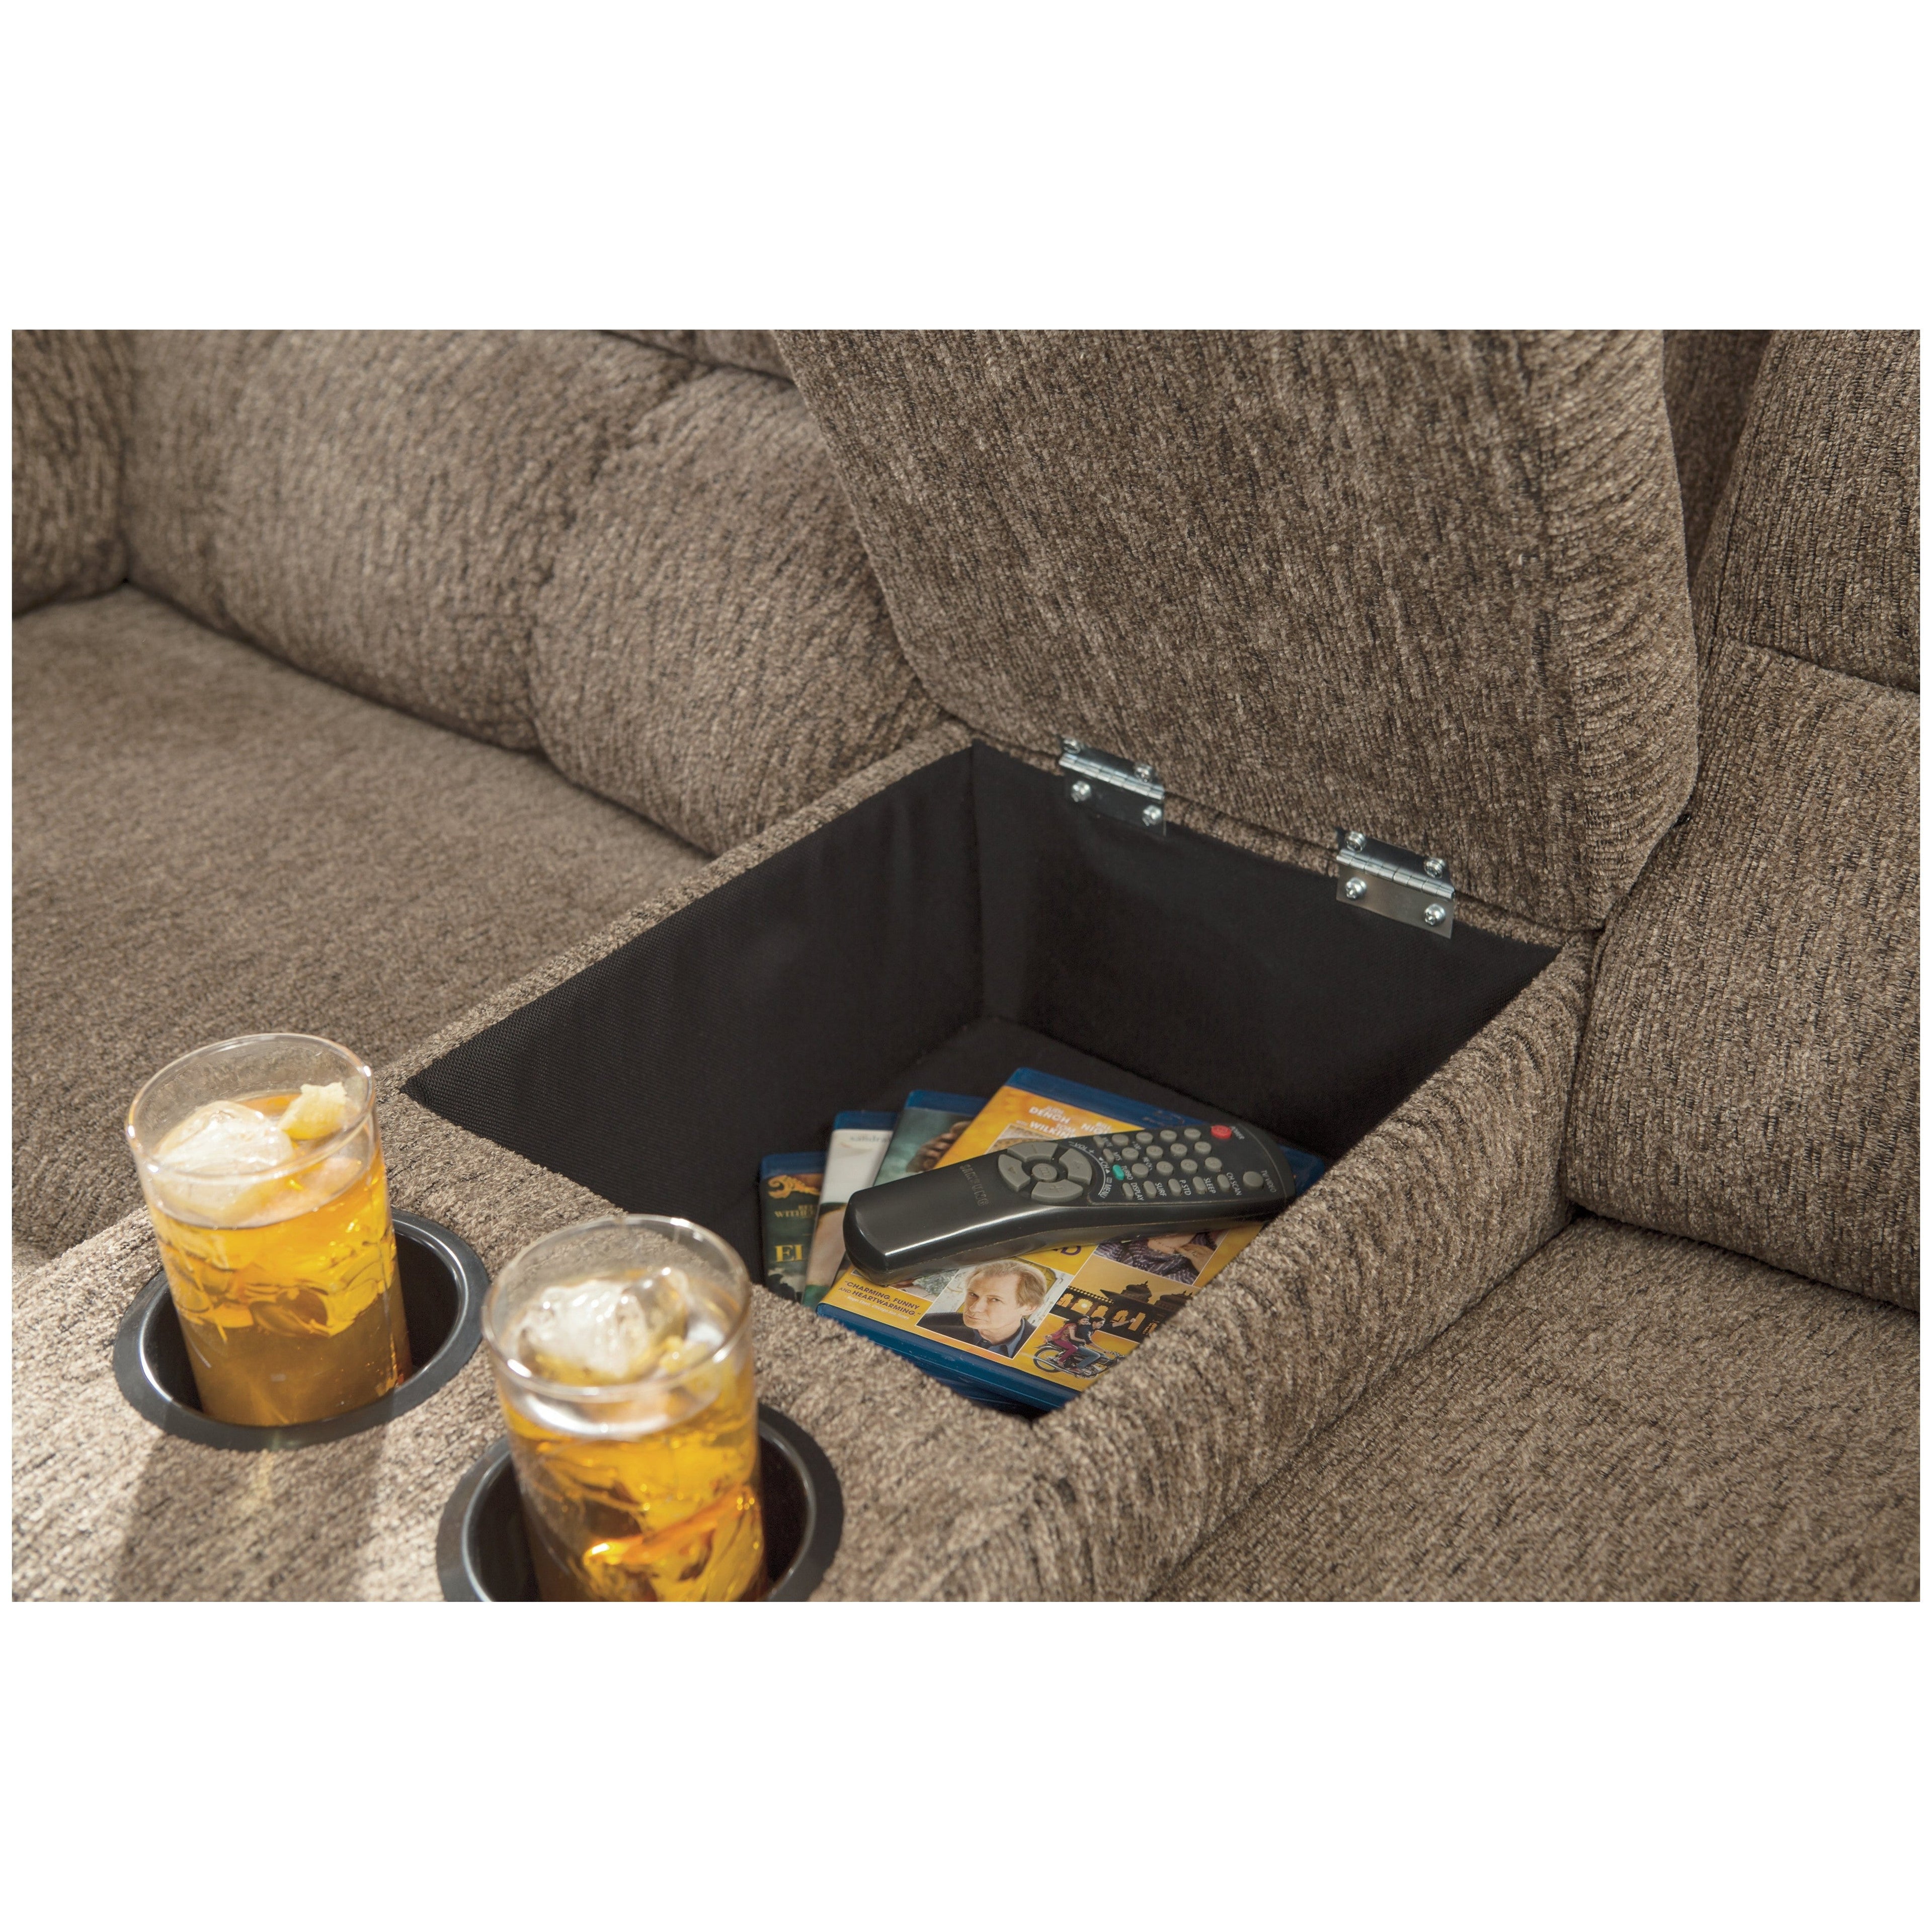 Workhorse Reclining Loveseat with Console Ash-5840194